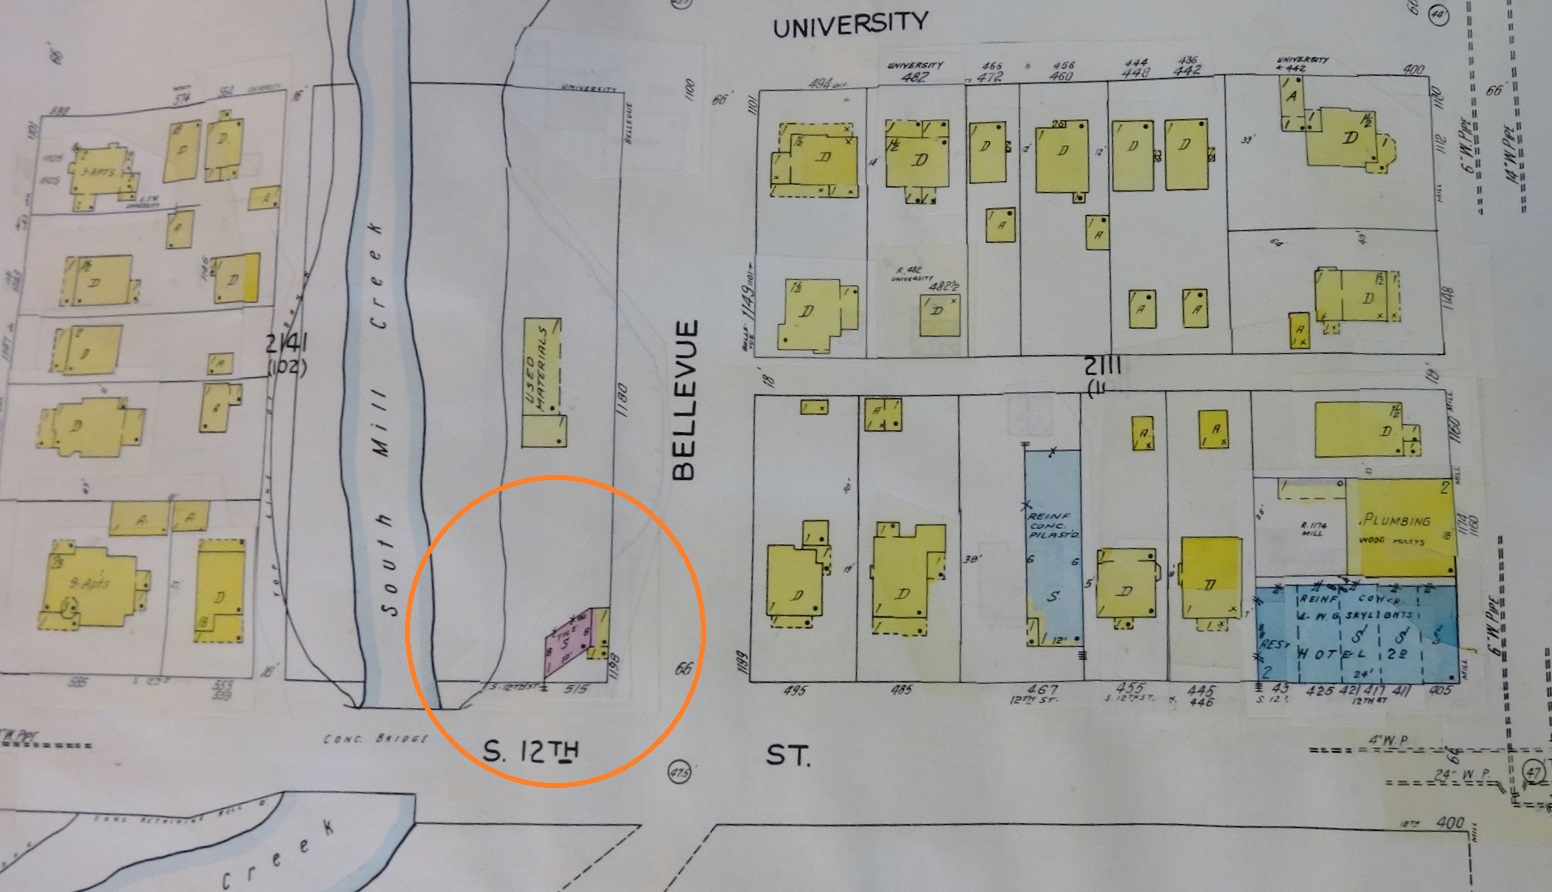 Sanborn Map updated to August 1958.  Corner circled in orange is where The RAM stands today.